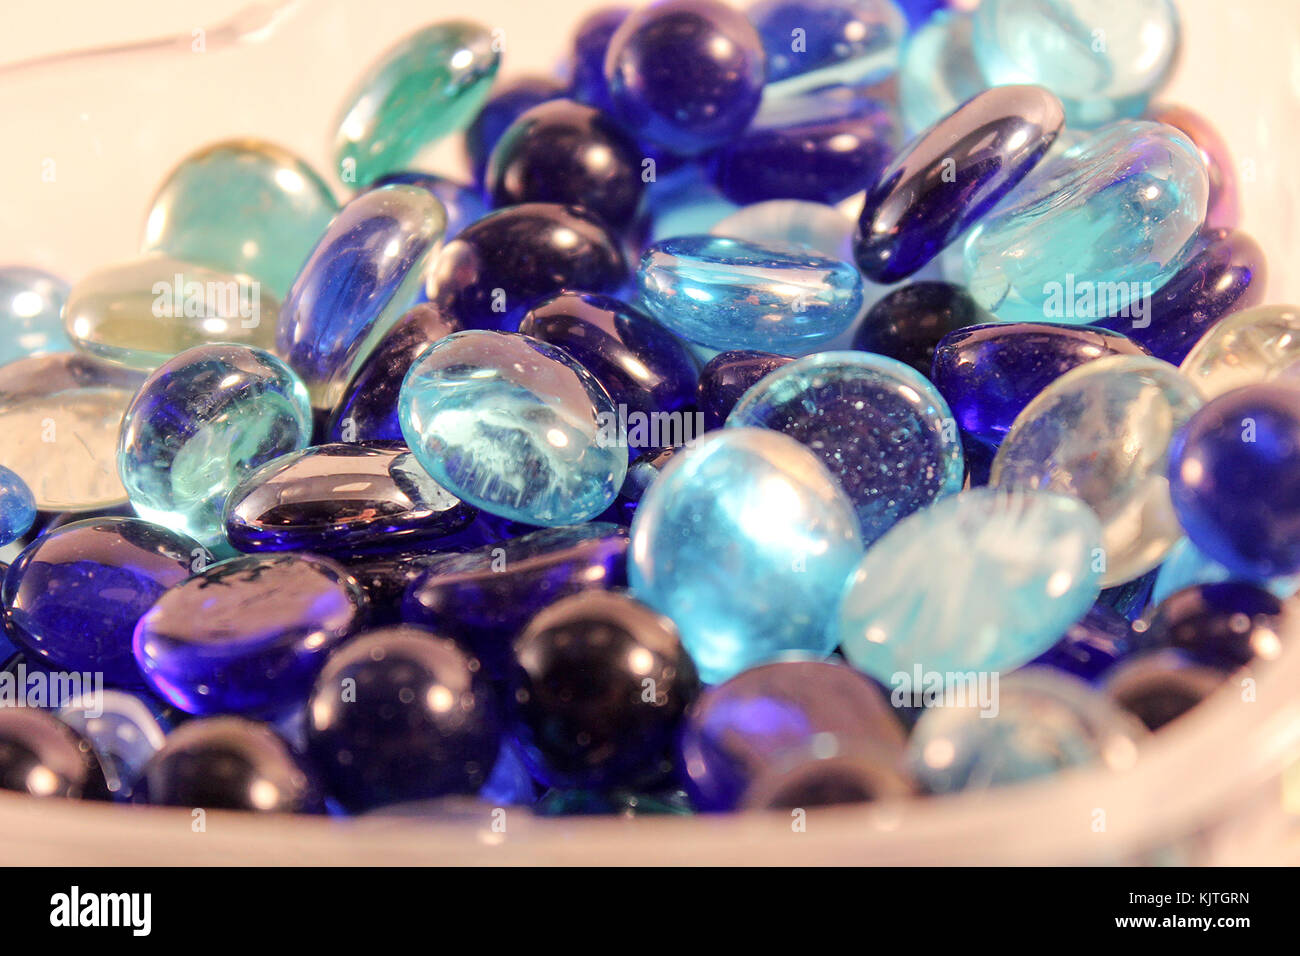 close up of glass blue and teal marbles in a glass container Stock Photo